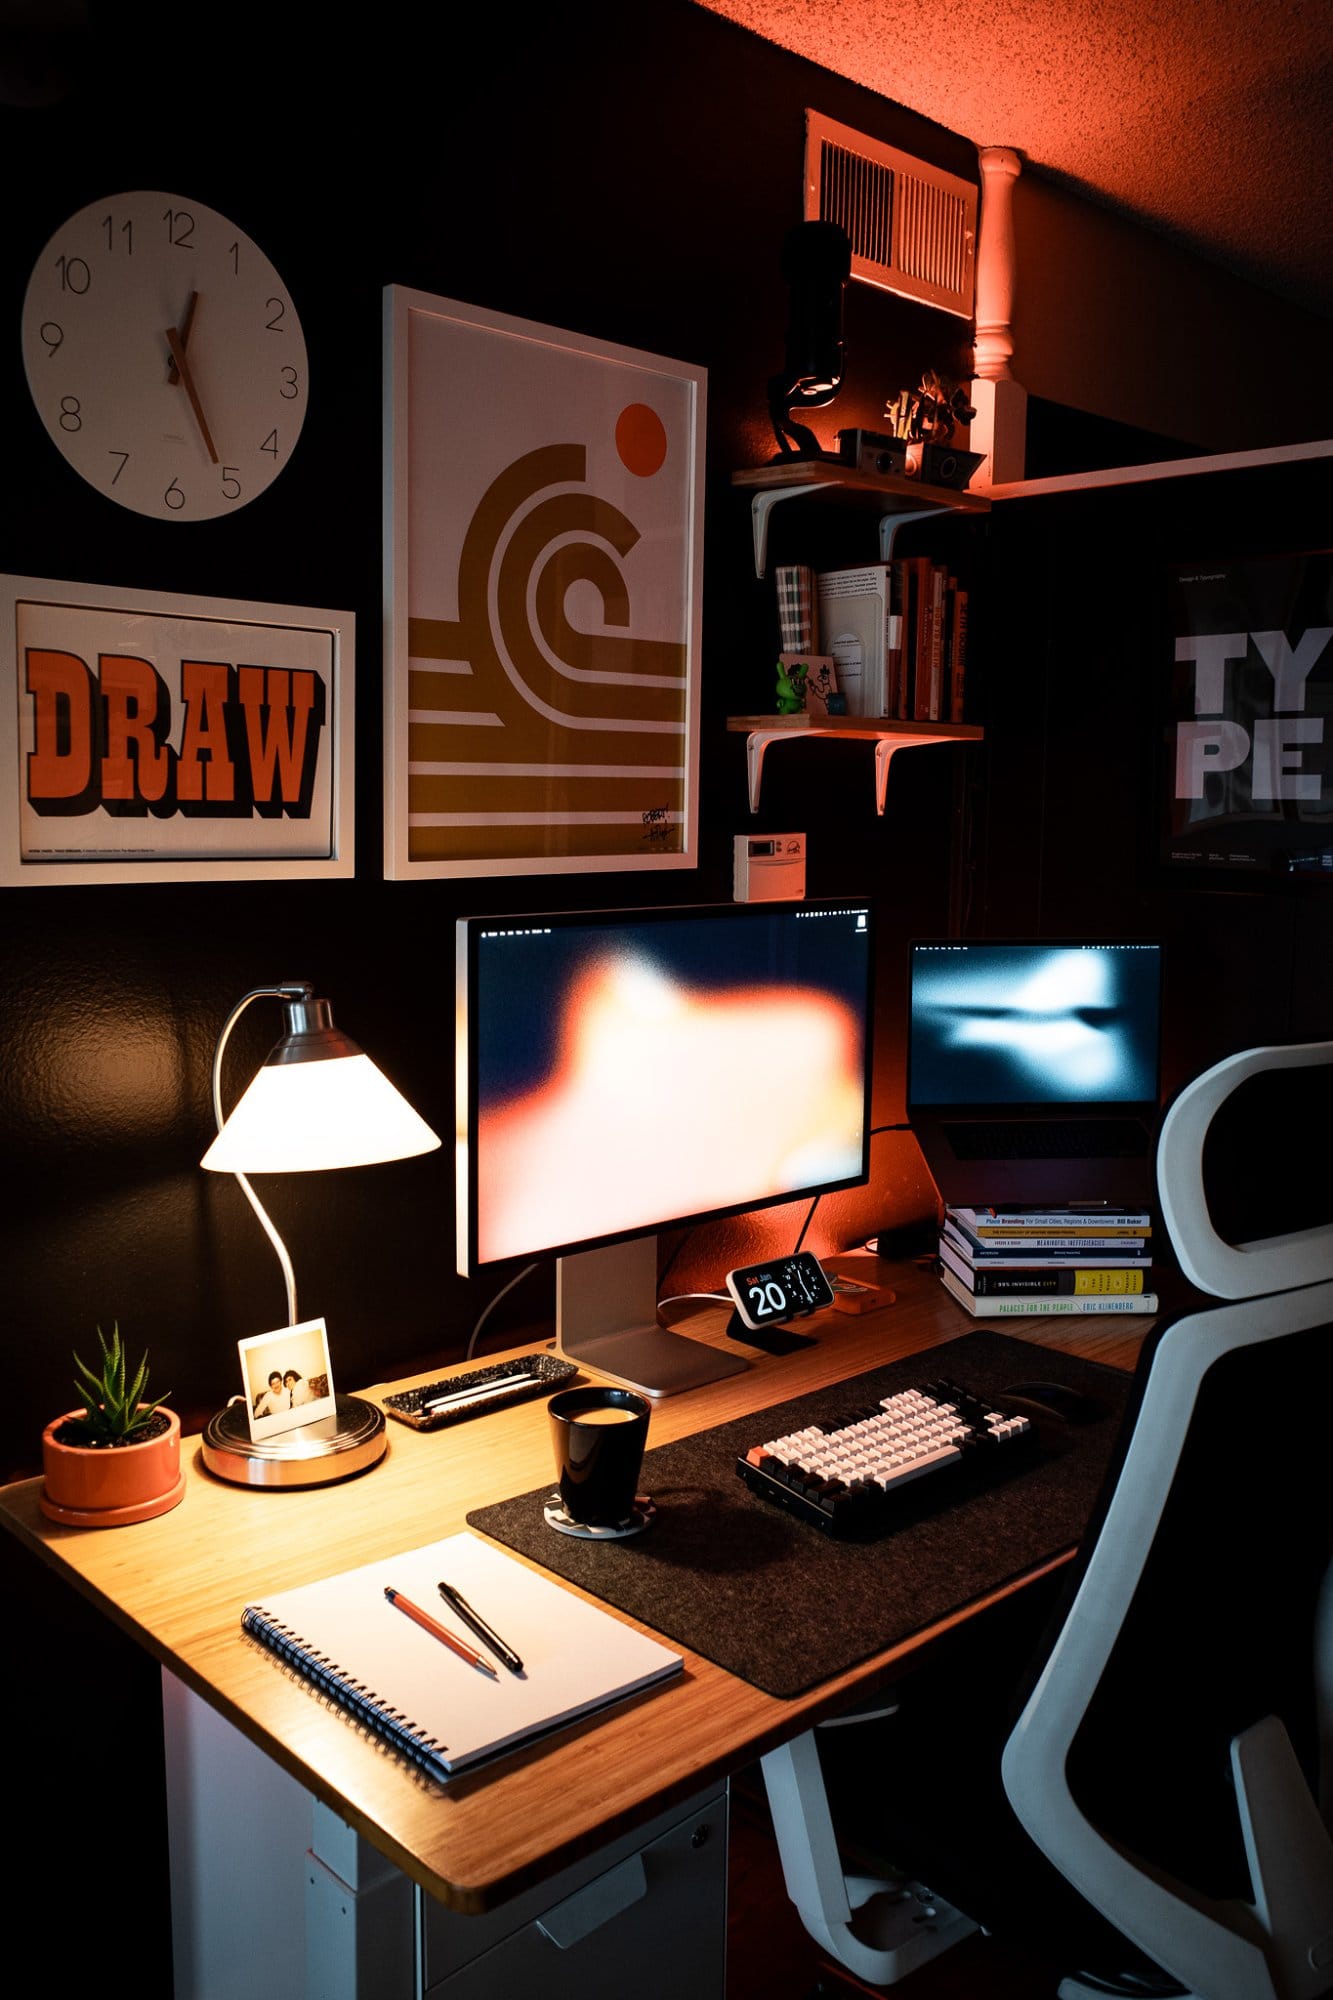 A modern workspace with a wall clock, art prints, shelves, a desk lamp, a mug, a plant, and stationery, with an office chair to the side